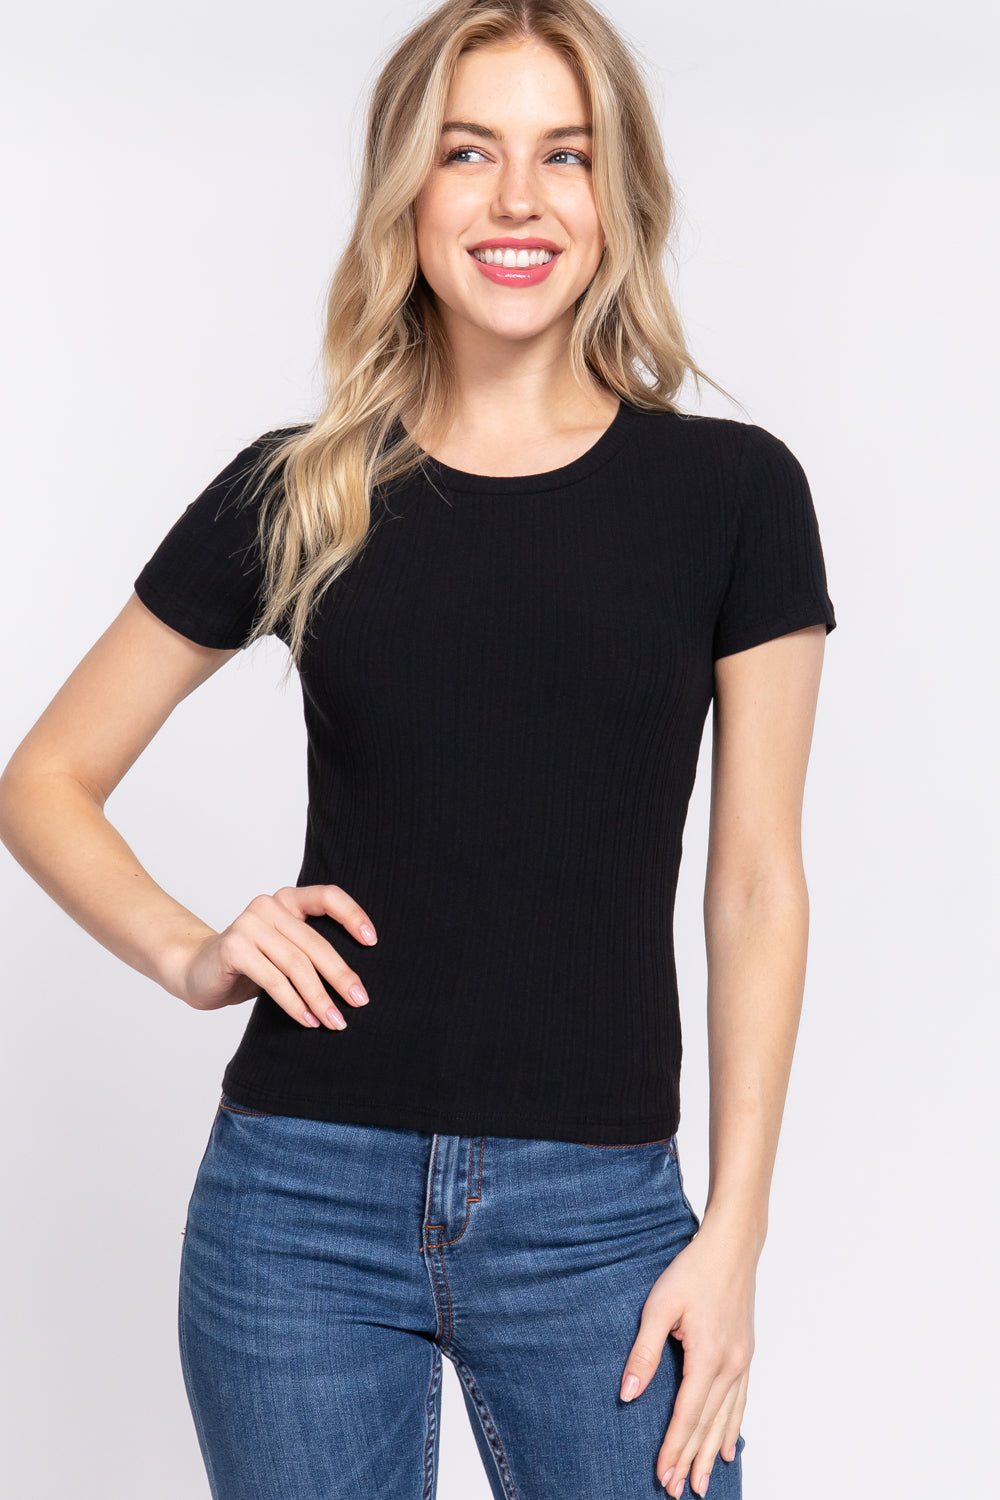 Women's black short sleeve top features a crew neckline and variegated rib knit fabric